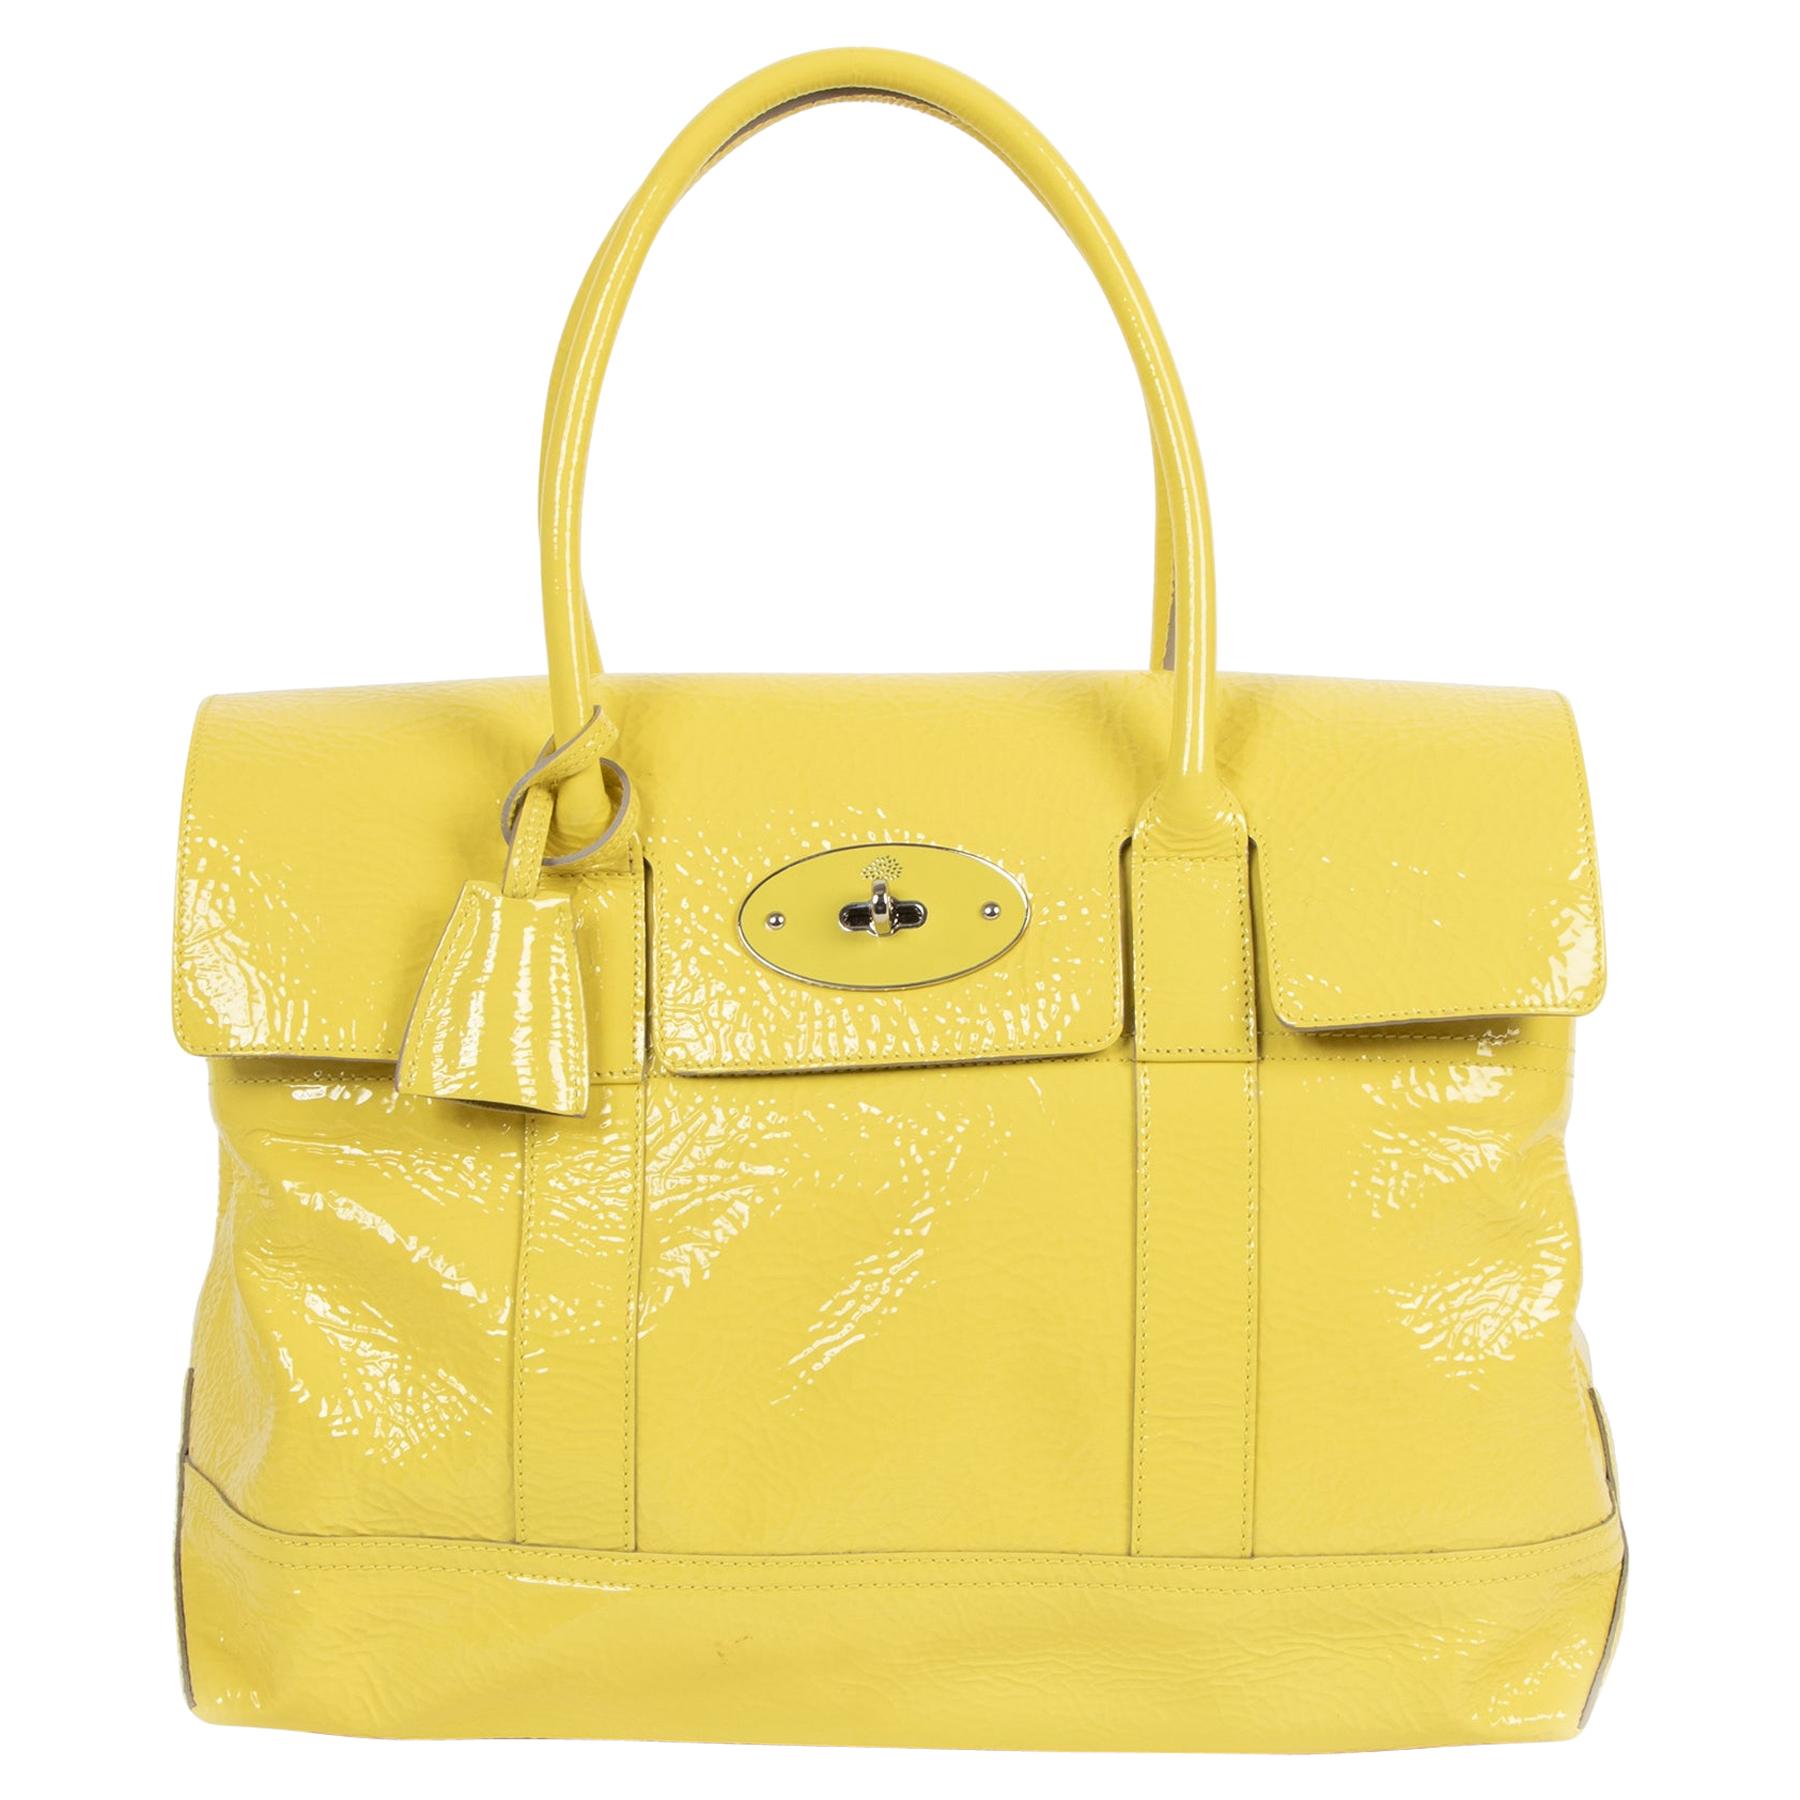 Mulberry Lemon Yellow Bayswater Patent Leather Bag